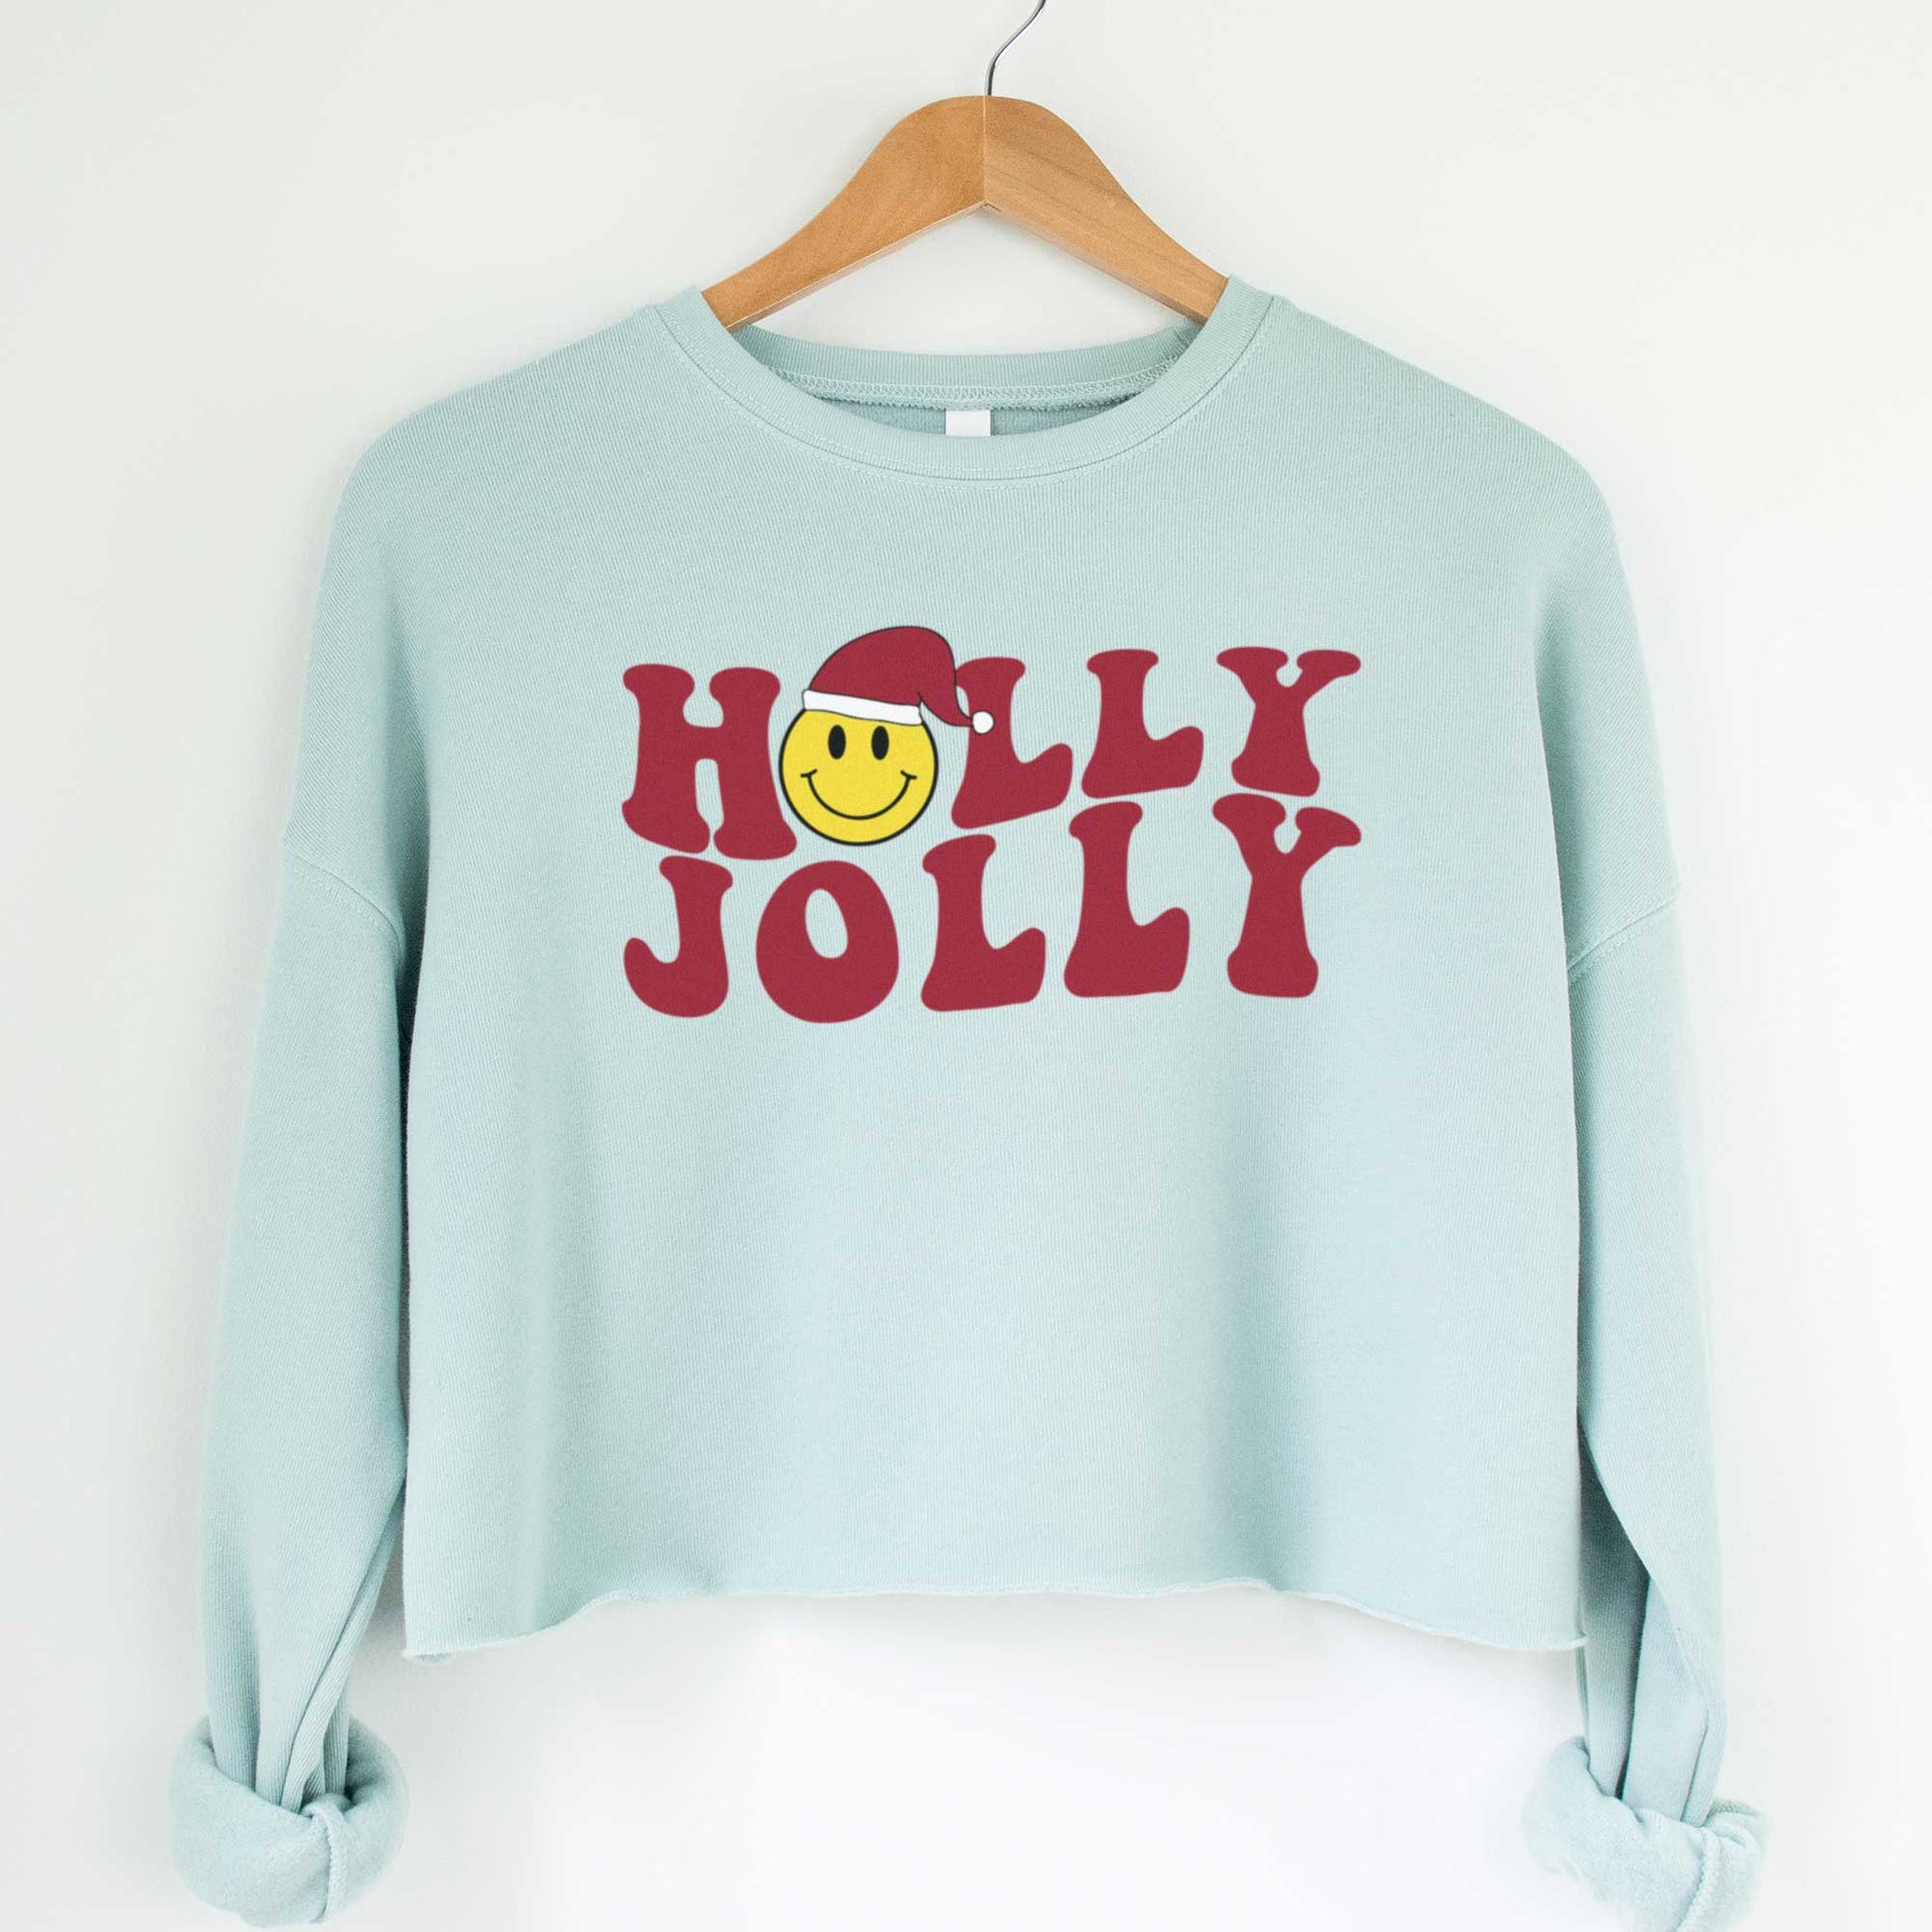 A hanging dusty blue cropped Bella Canvas sweatshirt featuring a yellow smiley face with a santa hat among the words holly jolly.